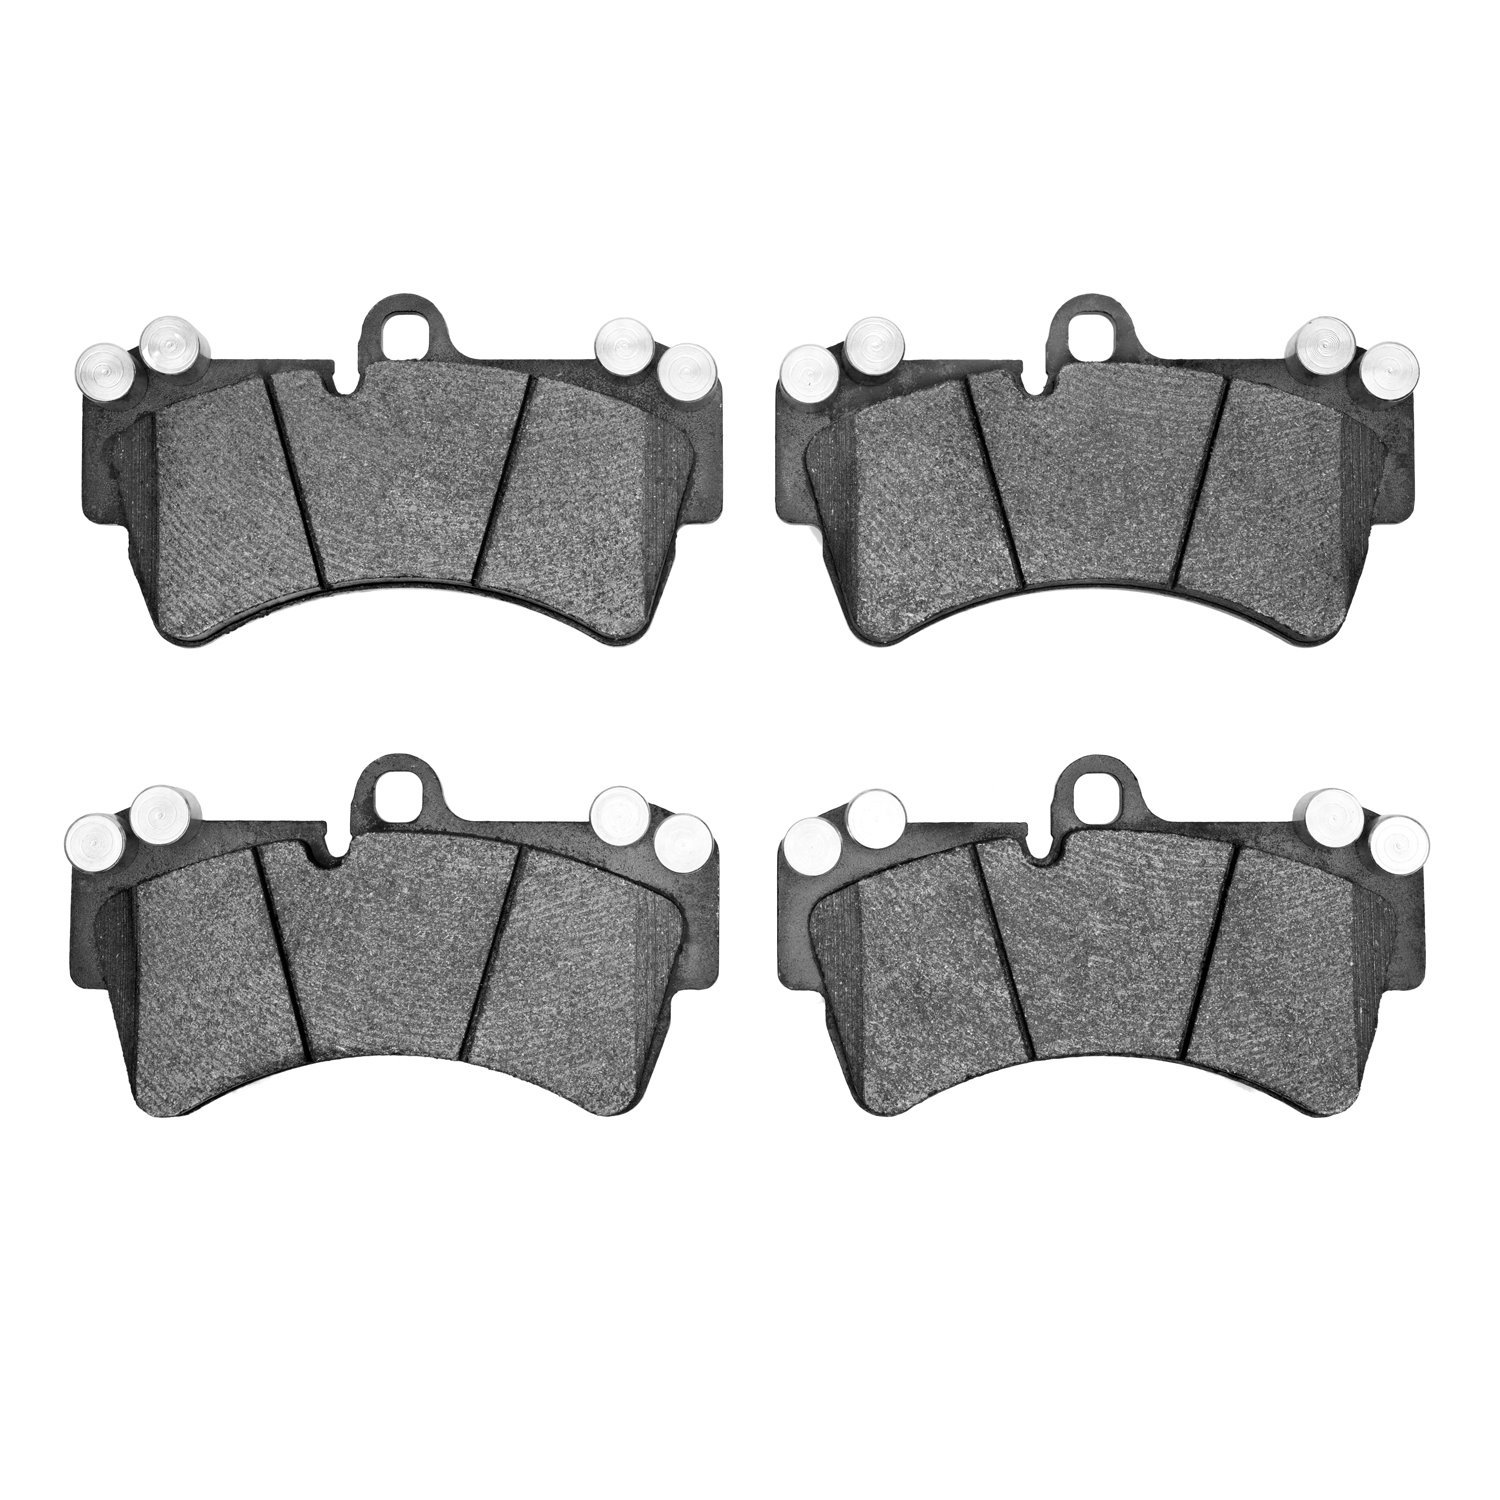 1551-0977-00 5000 Advanced Low-Metallic Brake Pads, 2003-2015 Multiple Makes/Models, Position: Front